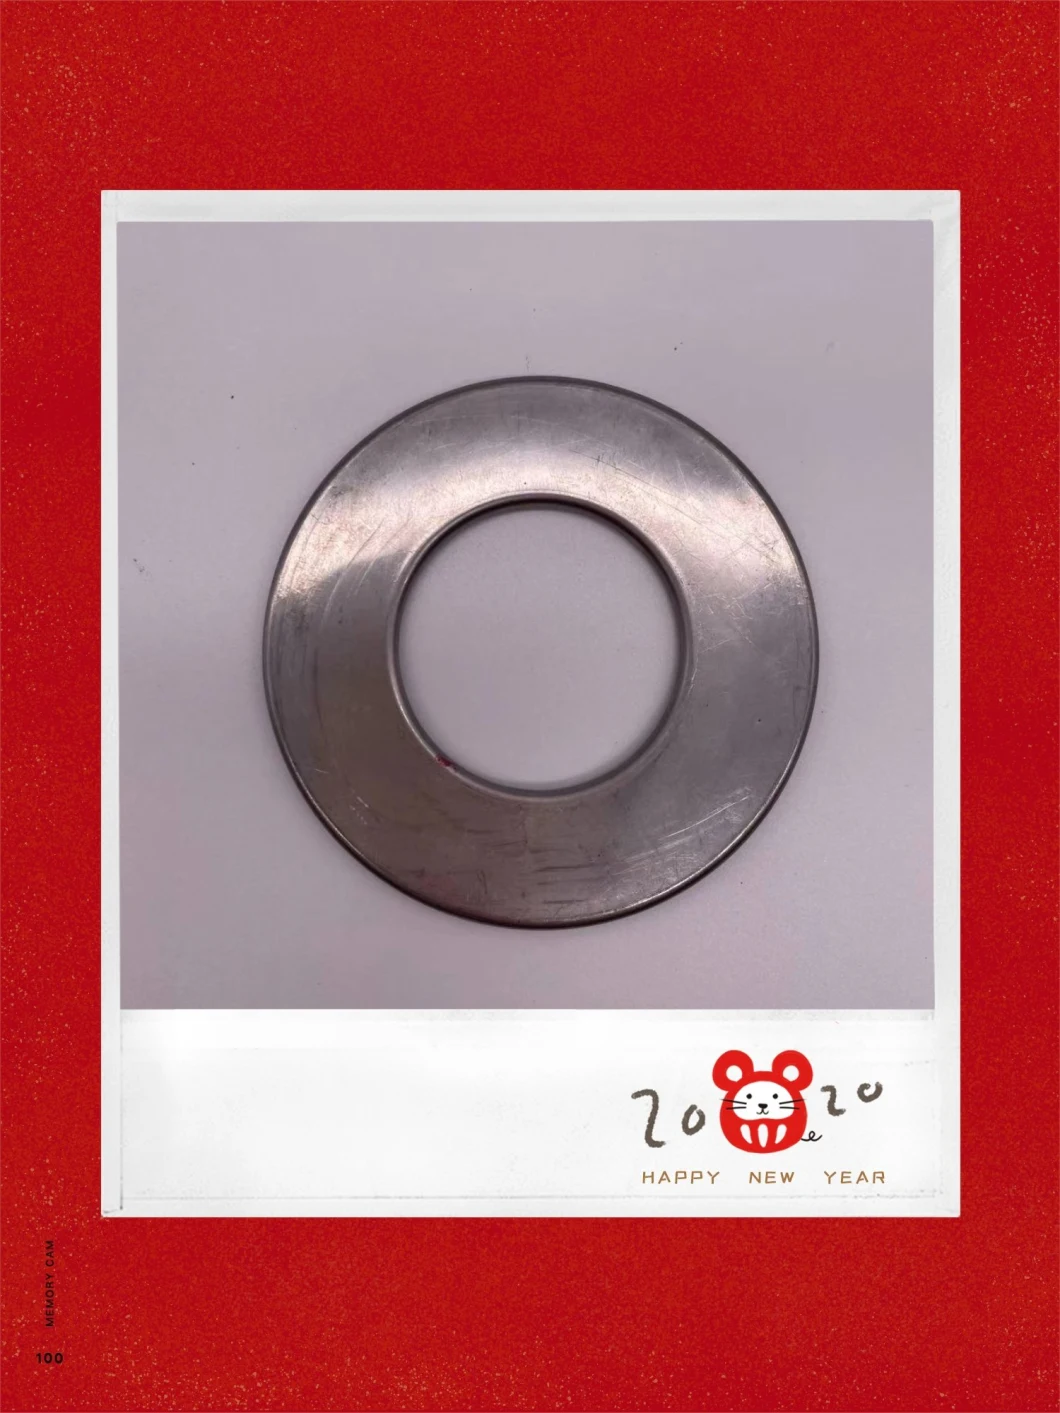 Metal Double Jacketed Gasket with Graphite Insert